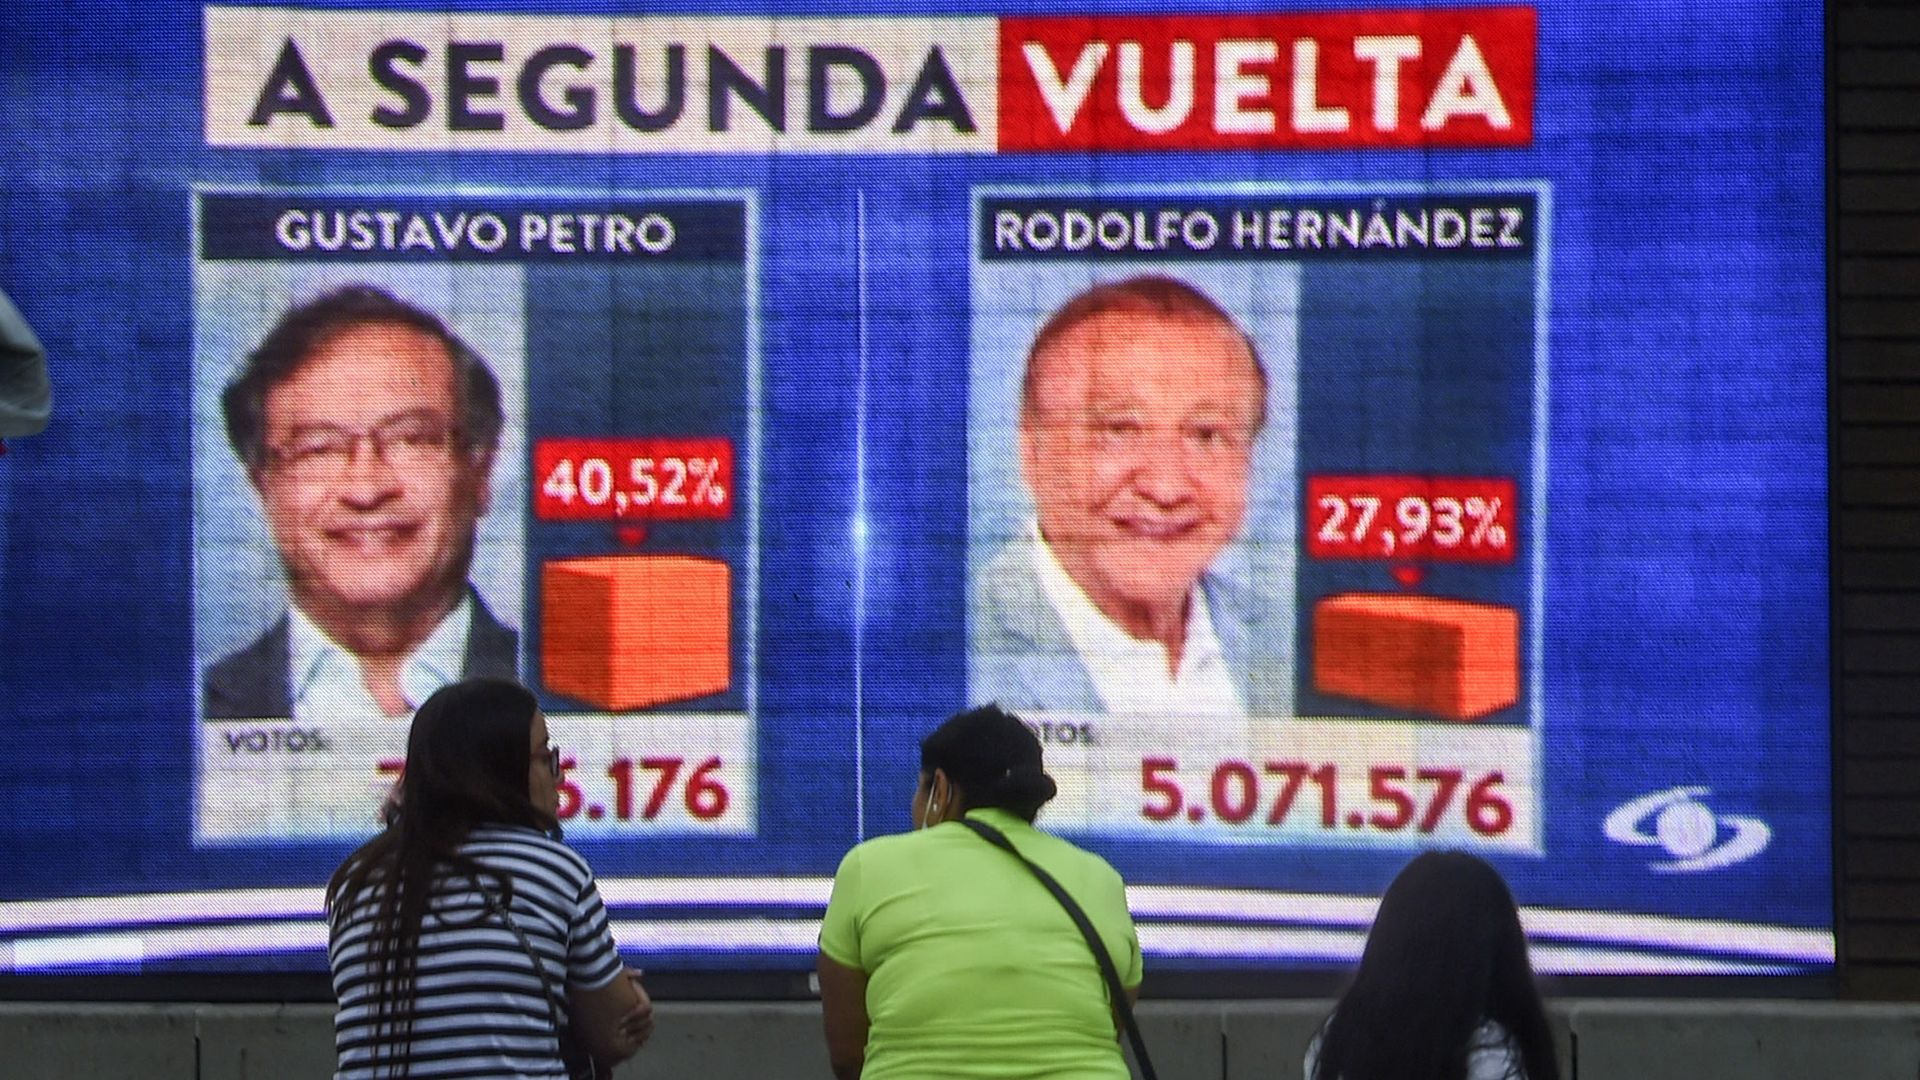 People watch electoral results in a screen during the Colombian presidential election, in Medellin, Colombia, on May 29, 2022.